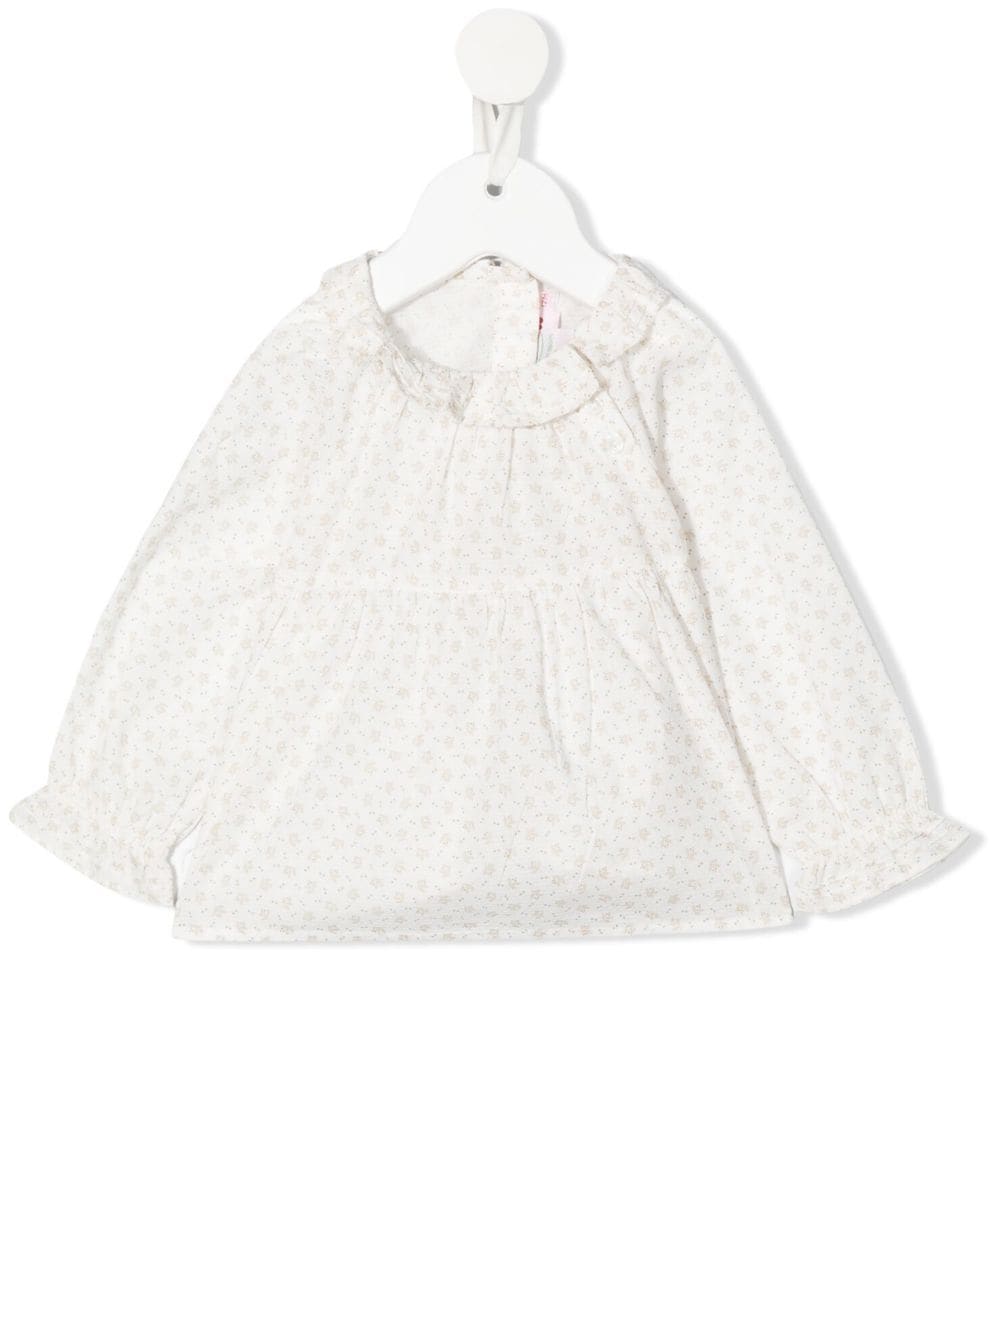 BONPOINT FLORAL PRINT FRILL-COLLAR TOP